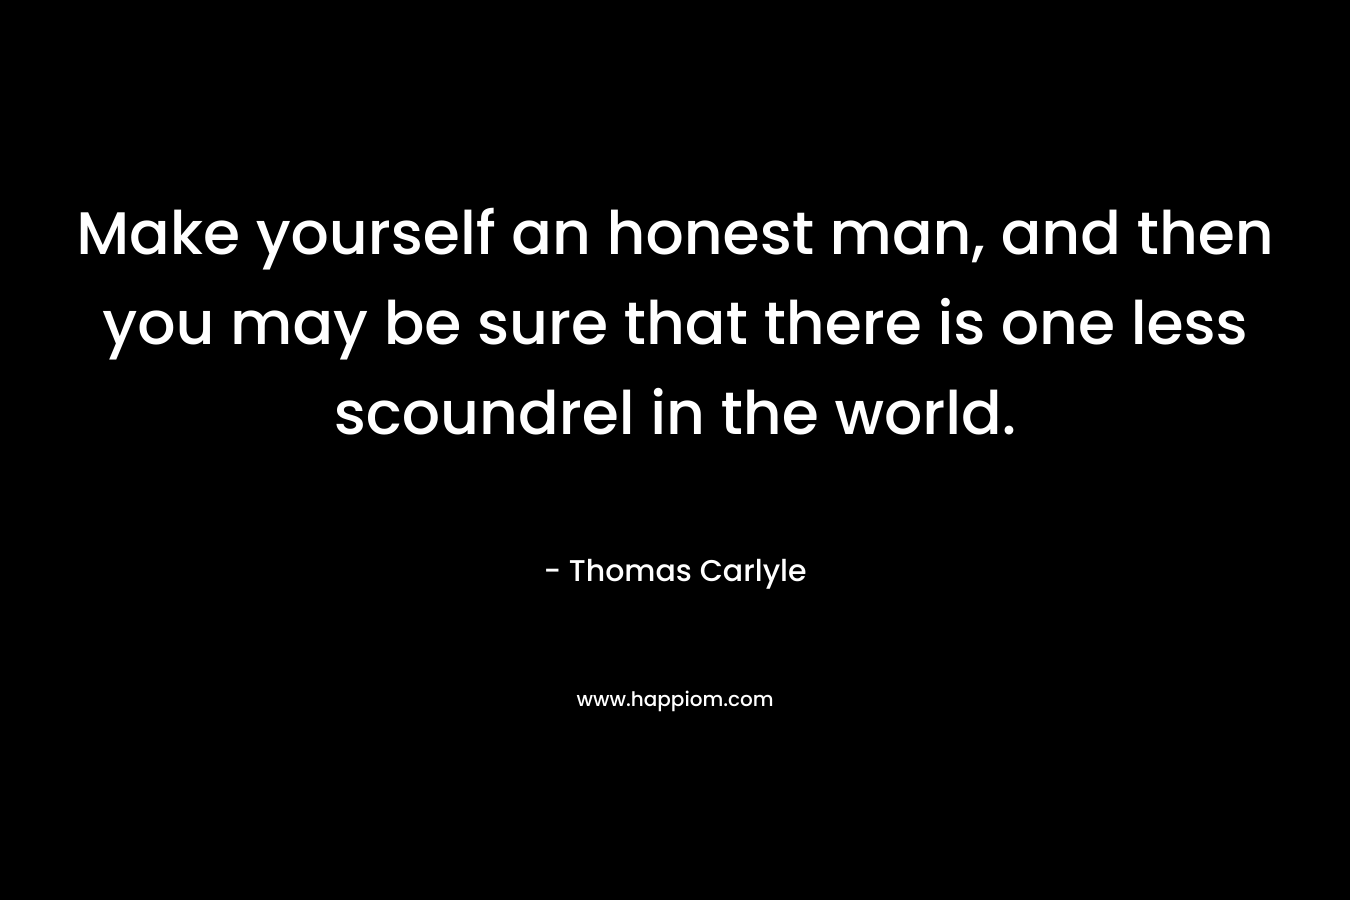 Make yourself an honest man, and then you may be sure that there is one less scoundrel in the world. – Thomas Carlyle